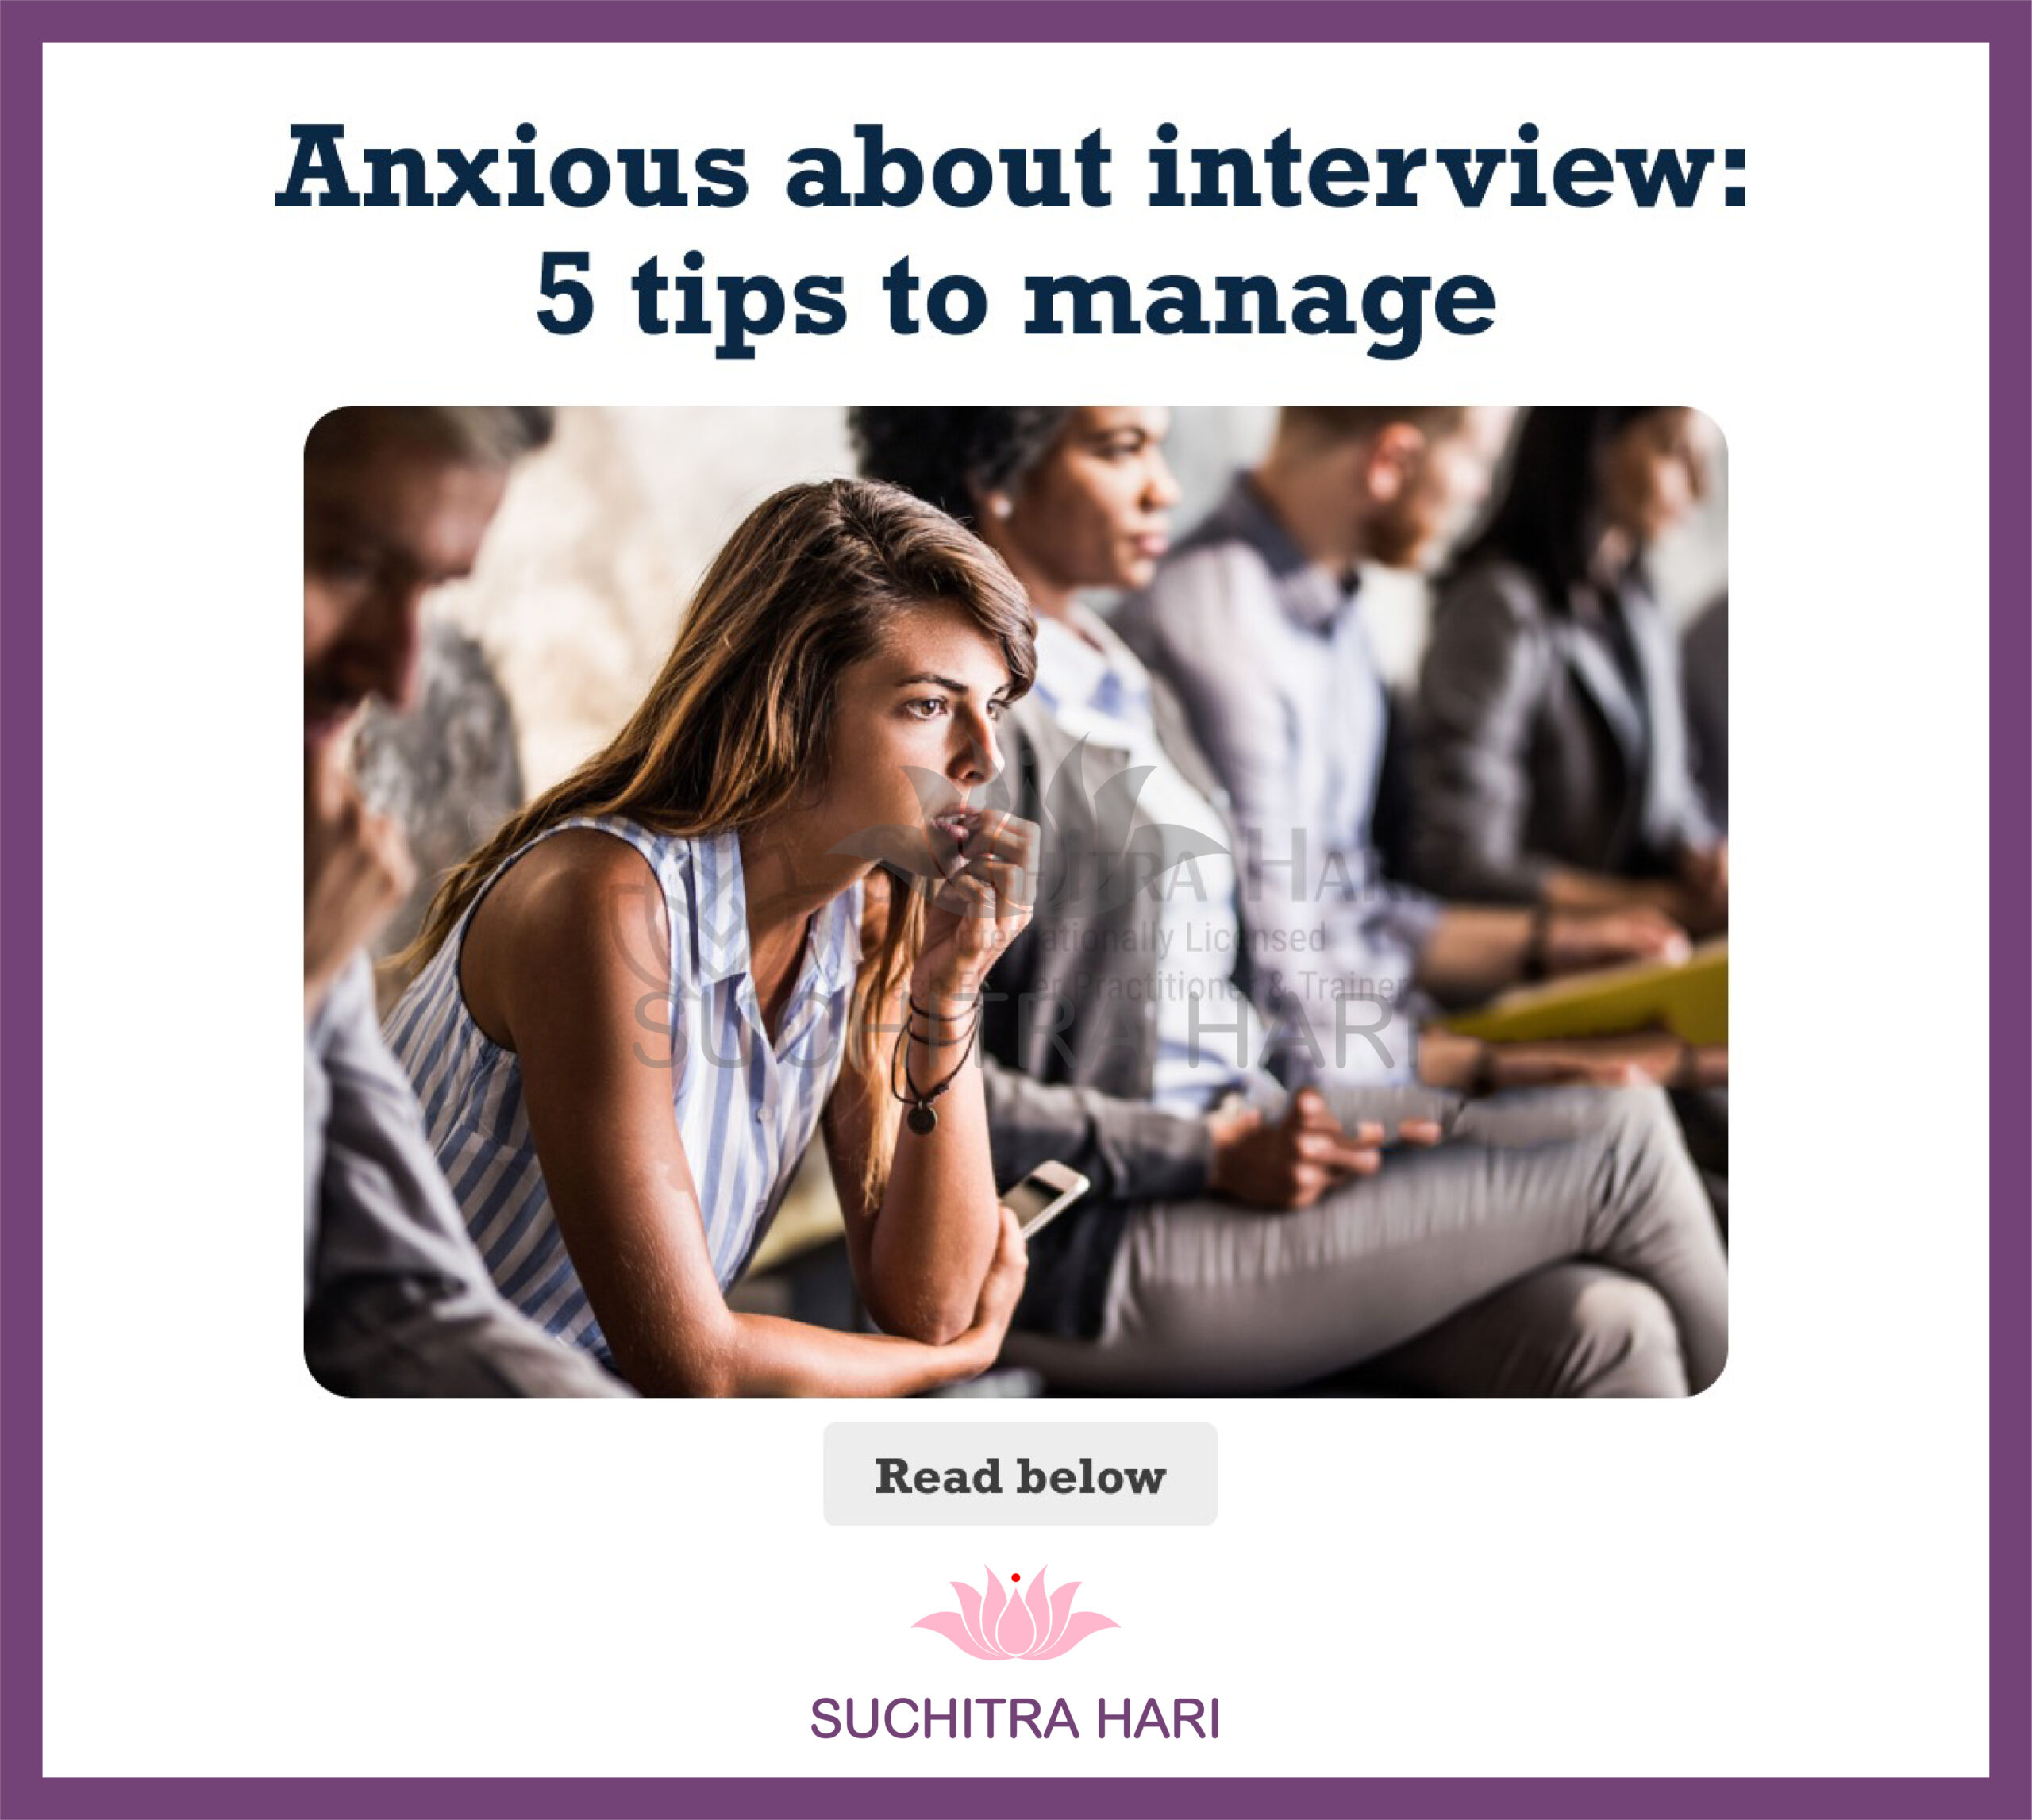 Anxious about interview: 5 tips to manage